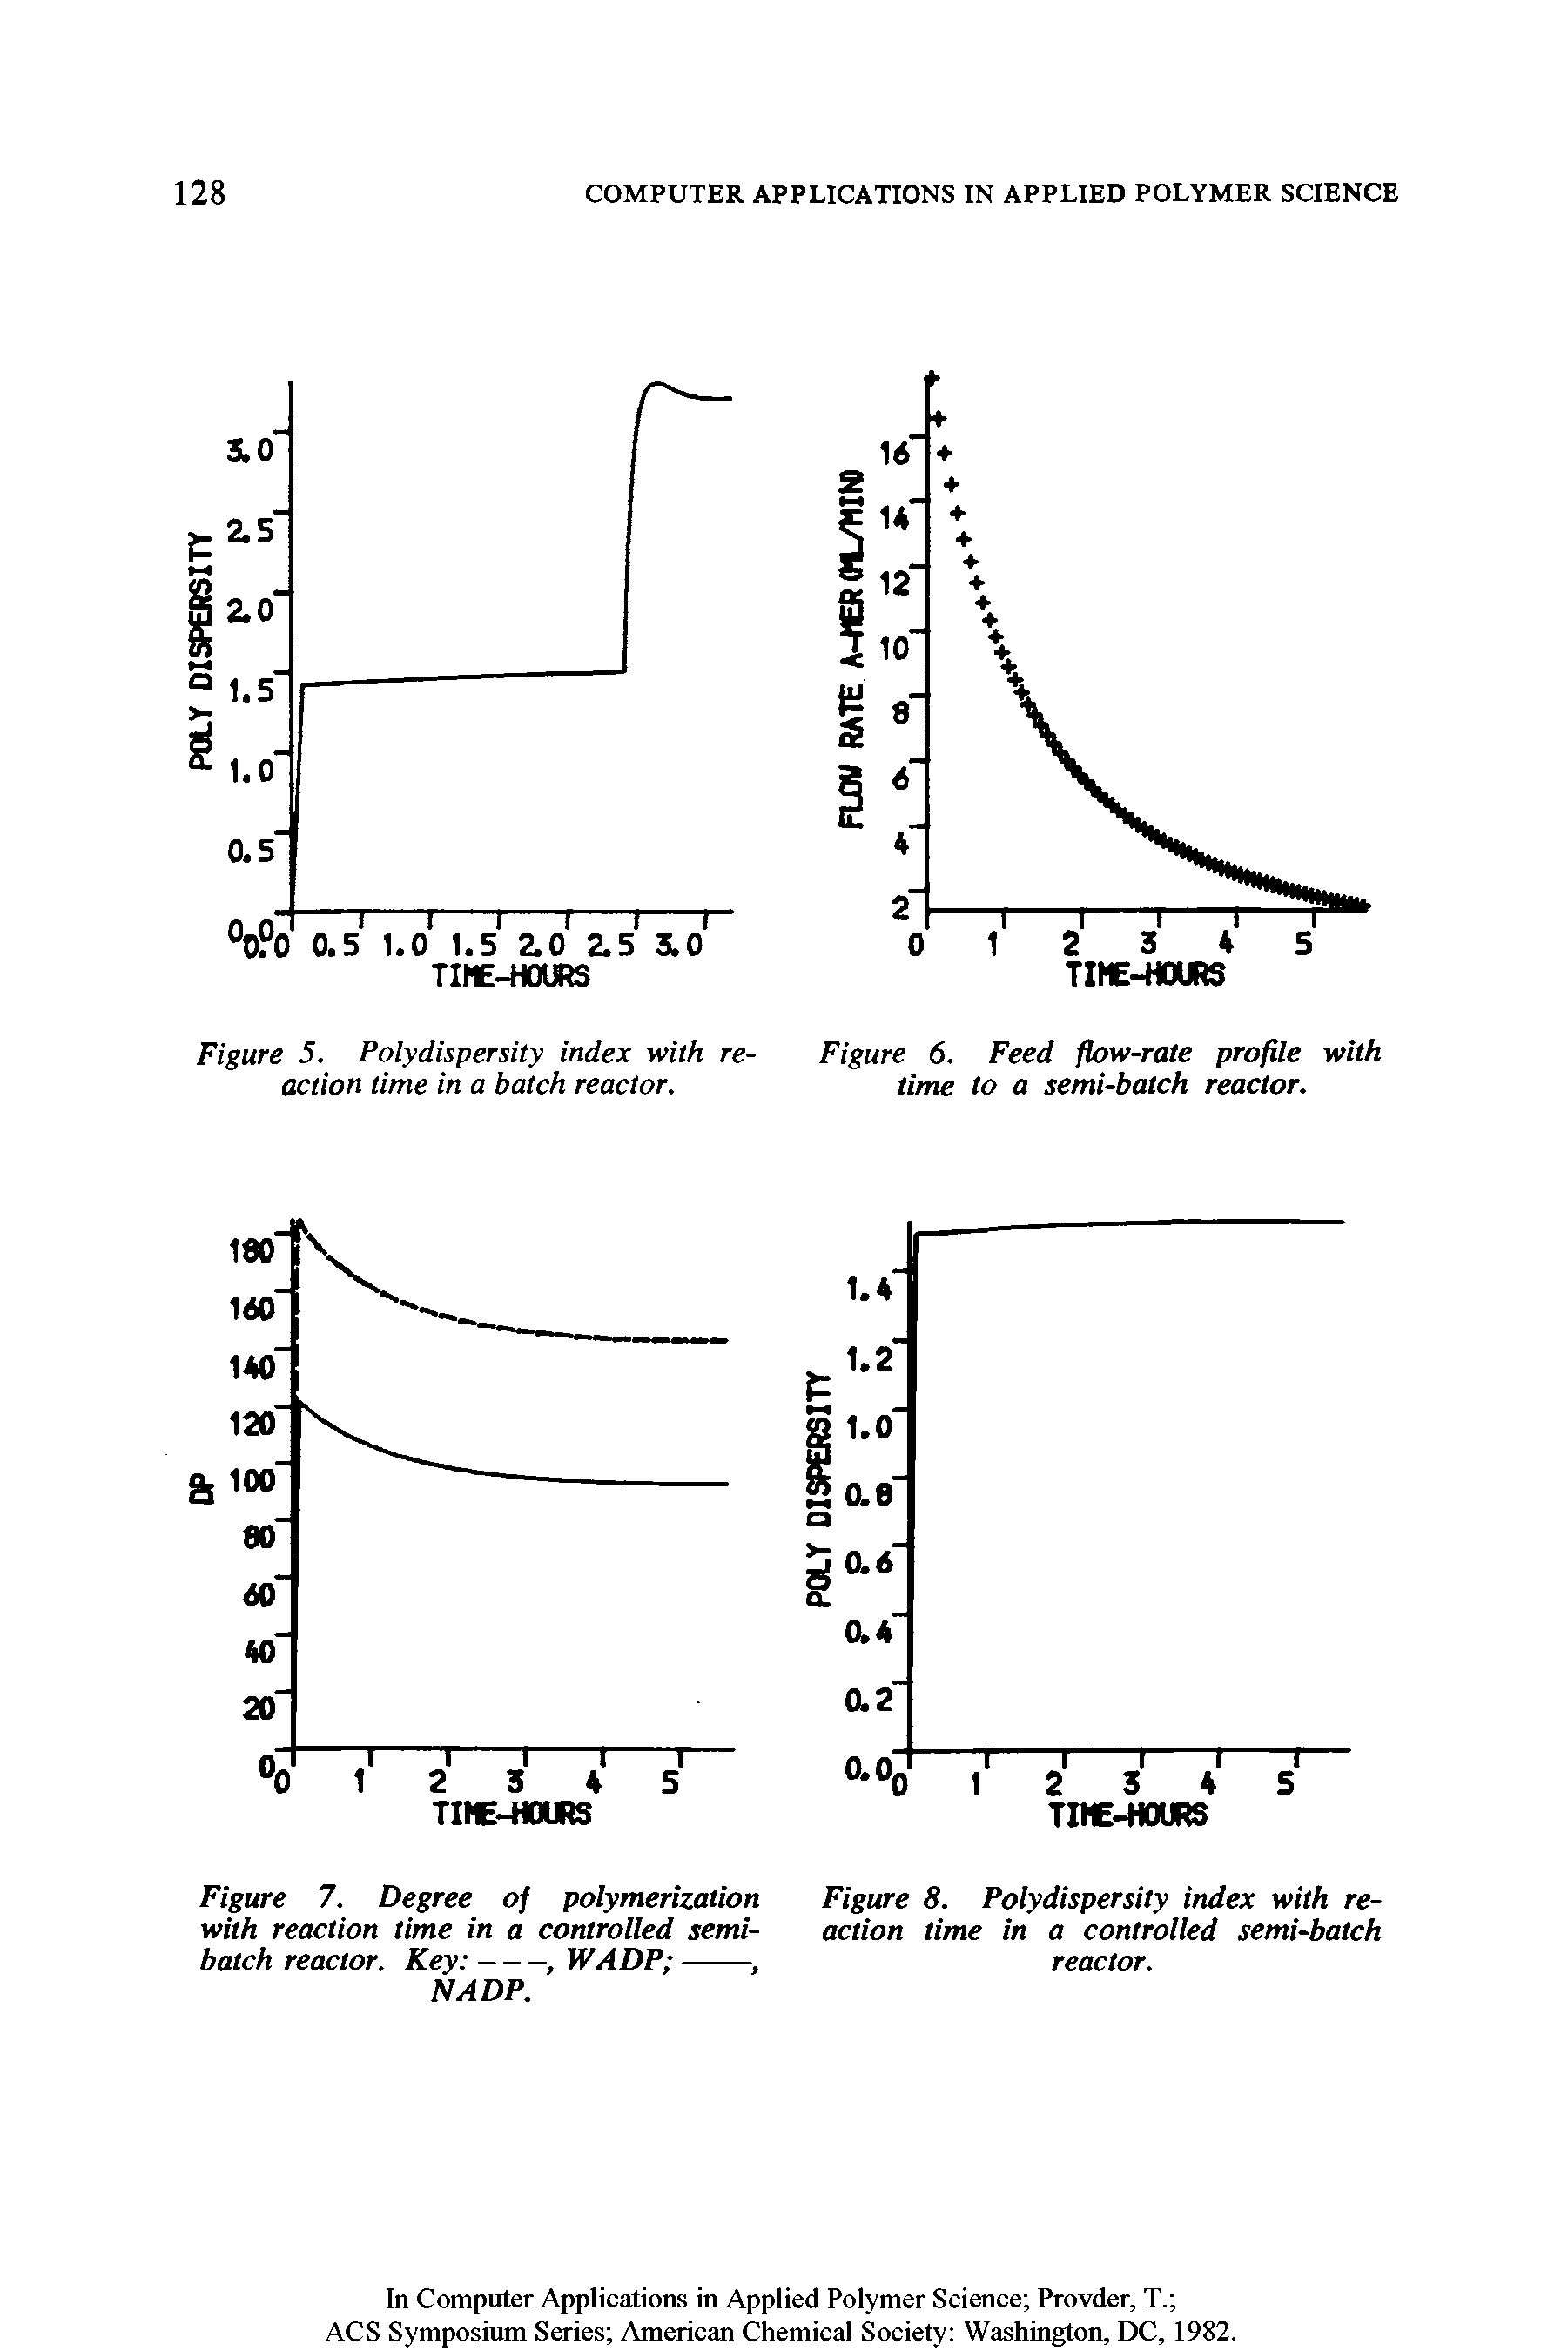 Figure 5. Polydispersity index with reaction time in a batch reactor.